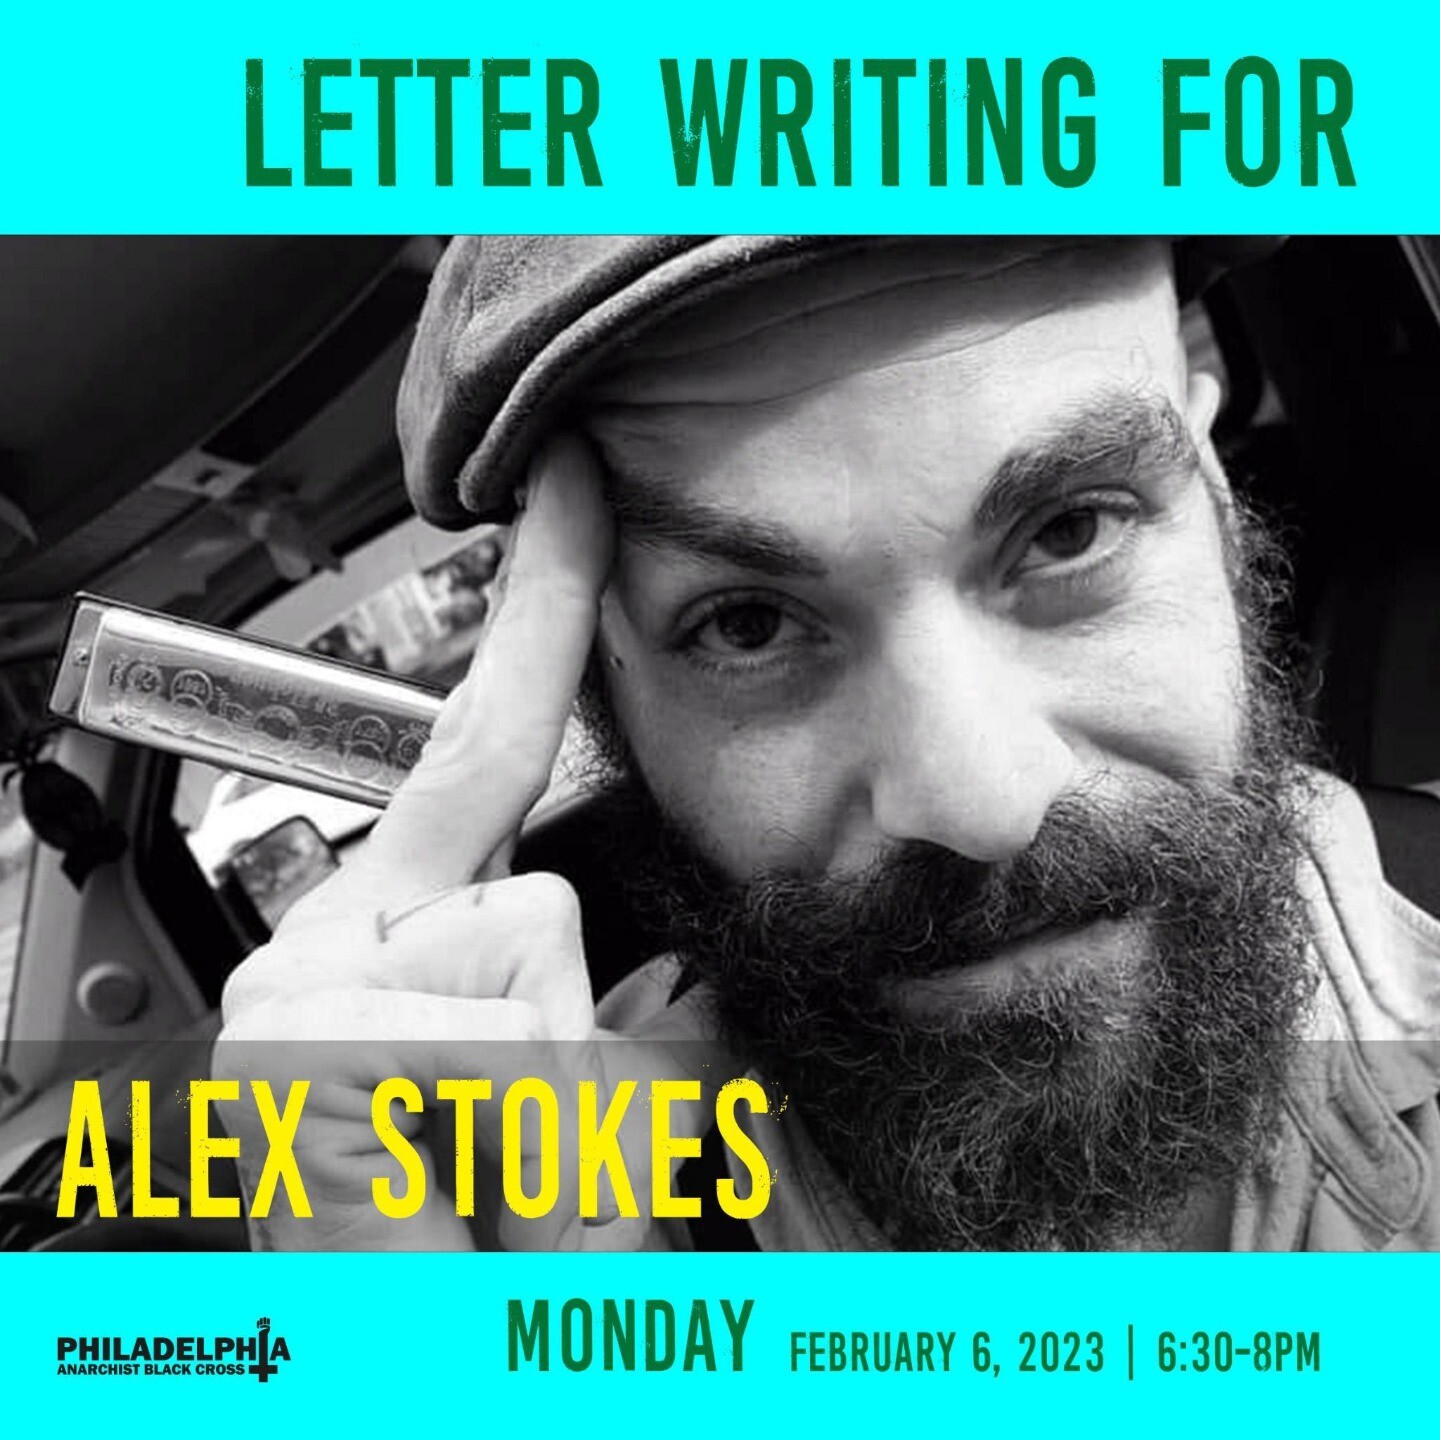 Image of Alex Stokes wearing a flat cap hat, and touching his eyebrow with right-hand index finger. He has a full beard and mustache. Bottom left corner is Philly ABC banner logo in black. The banner logo spells out Philadelphia Anarchist Black Cross with a cross and black fist that stand in place of the "I" in "Philadelphia". Text on image reads "Letter writing for Alex Stokes. Monday February 6th. 6:30-8PM."